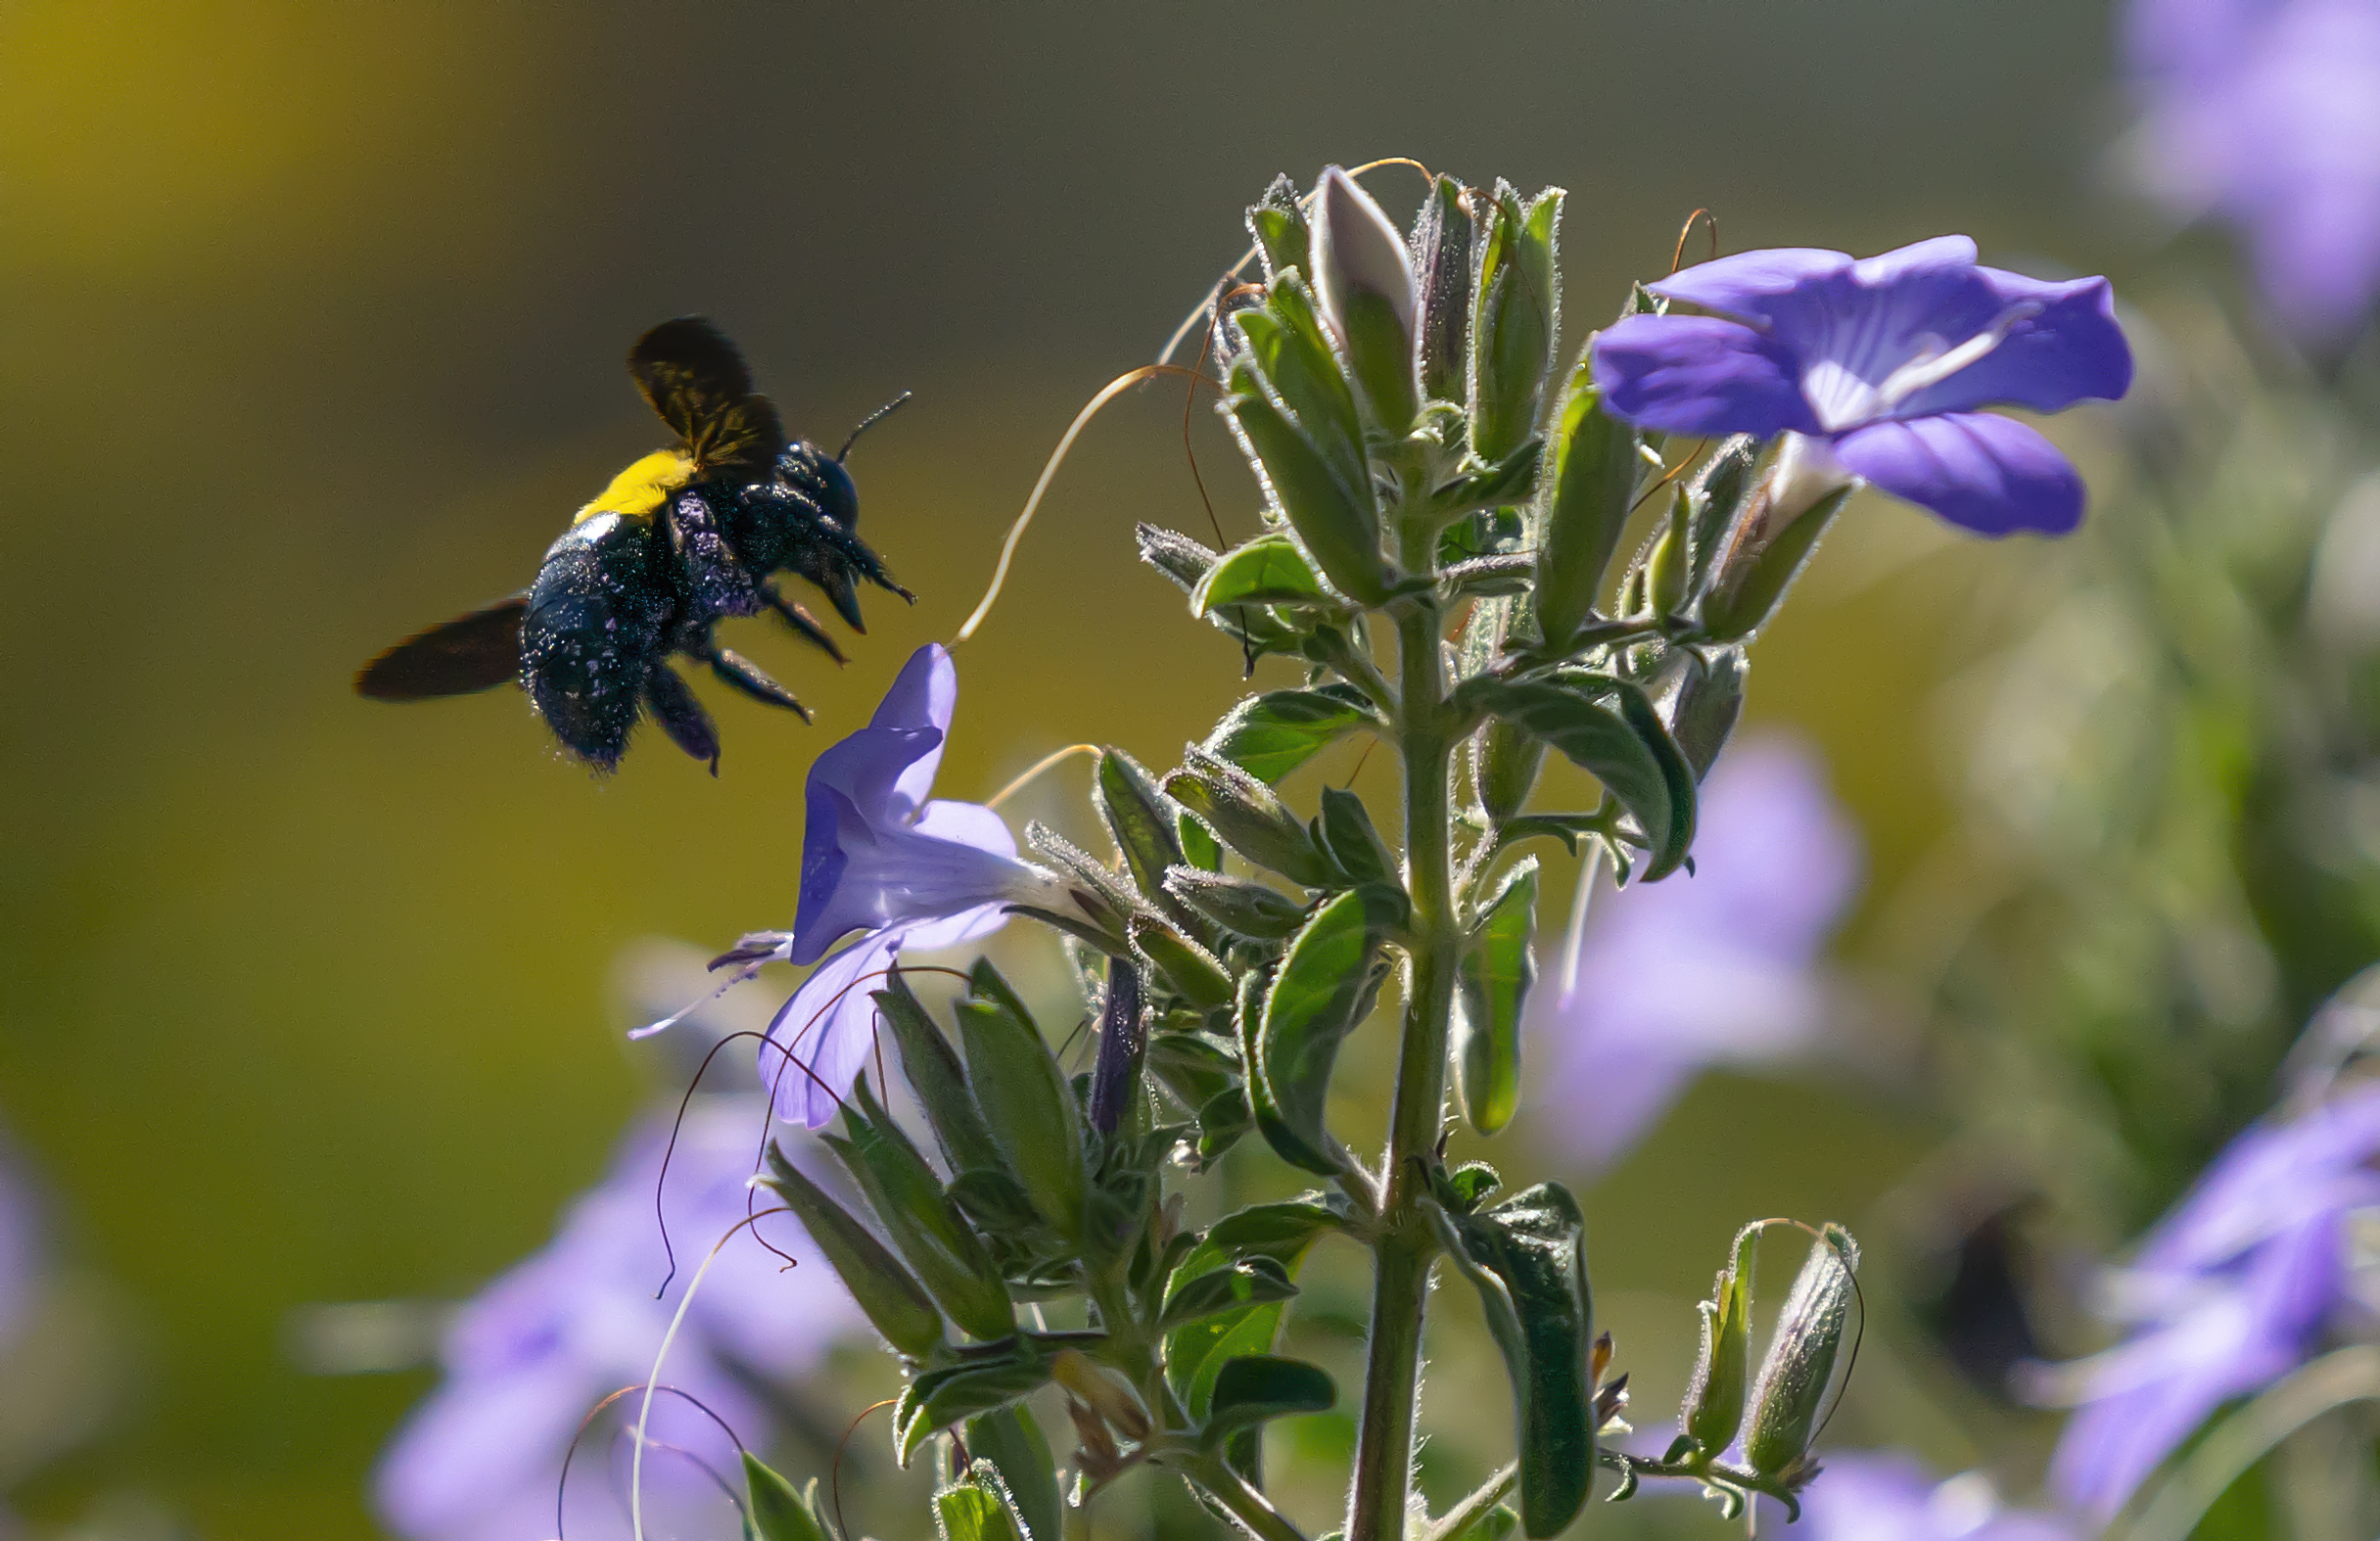 epa08382141 A Carpenter bee flies to a Fynbos flower in Cape Town, South Africa, 24 April 2020. Carpenter bees are considered solitary bees traditionally spending most of their time alone. EPA-EFE/NIC BOTHMA